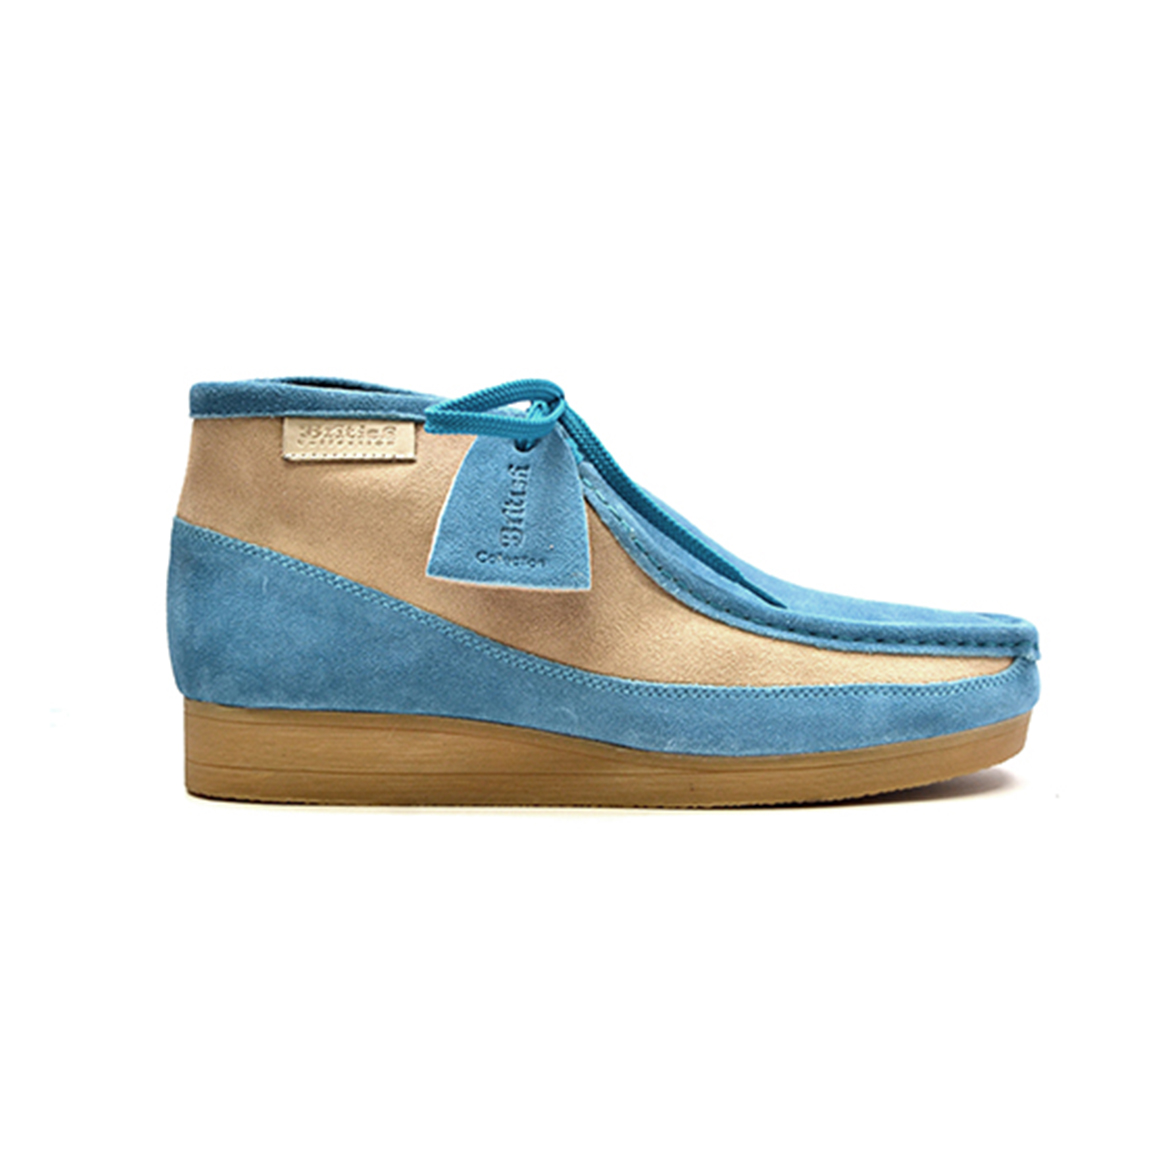 British CollectionNew Castle-Blue and Beige Suede [999-8-17] - $125.00 ...